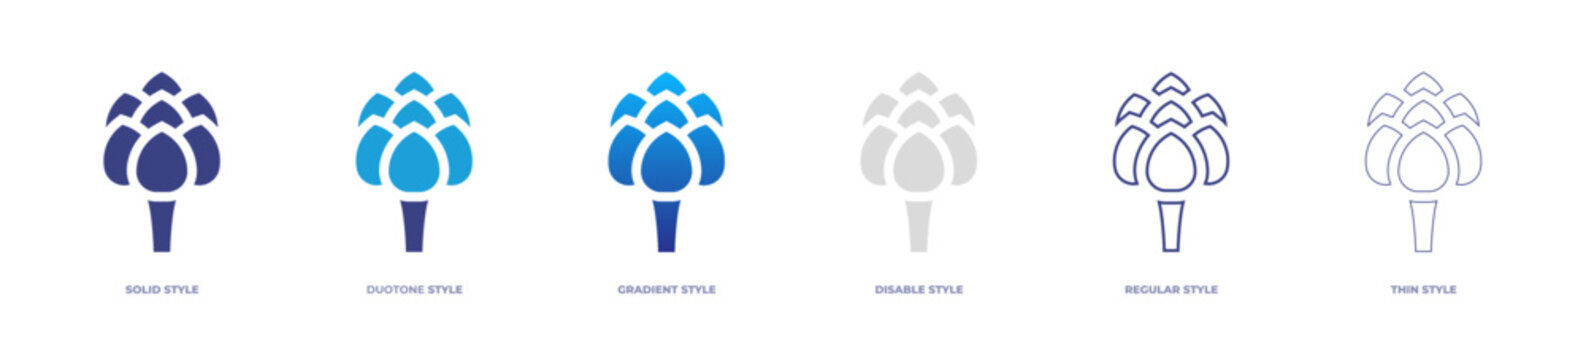 Artichoke icon set full style. Solid, disable, gradient, duotone, regular, thin. Vector illustration and transparent icon.